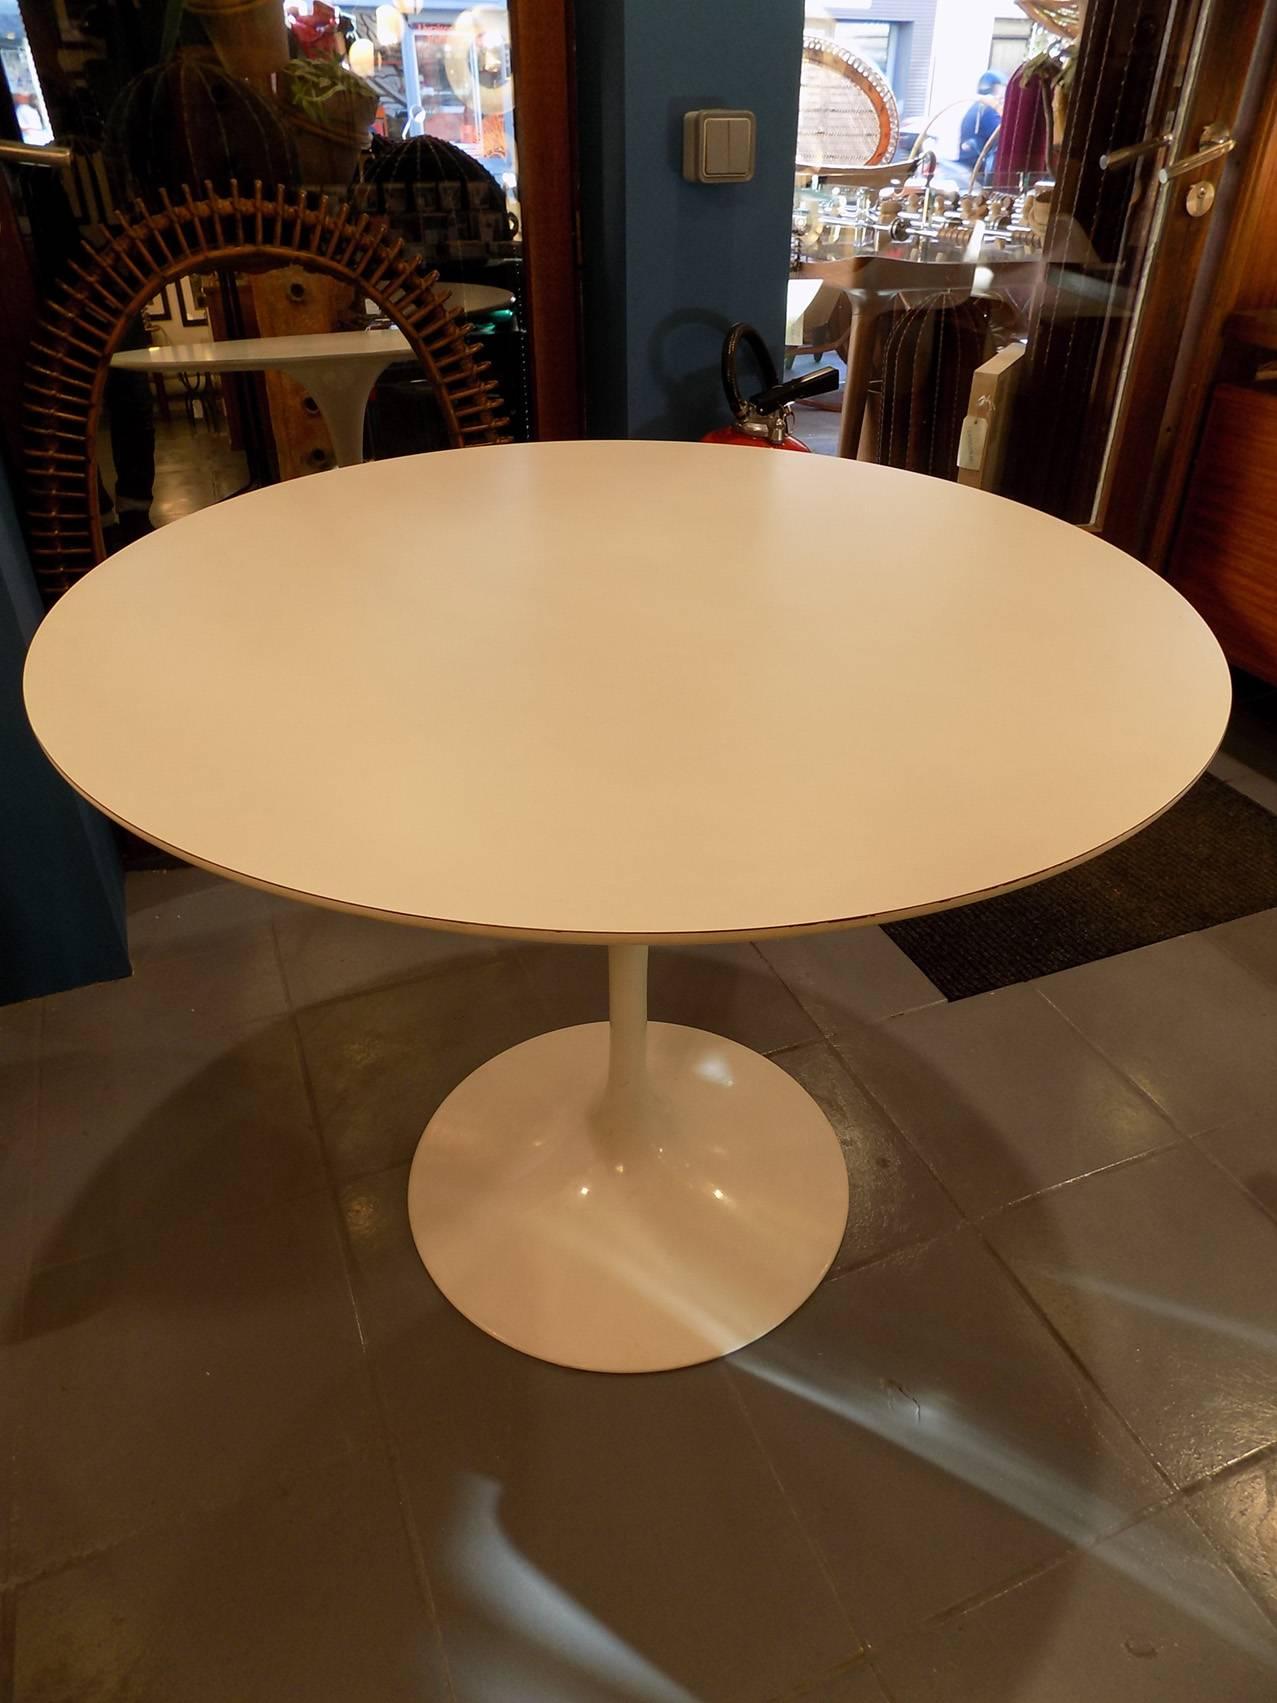 Knoll Saarinen tulip dining table. White laminate top with white metal base.